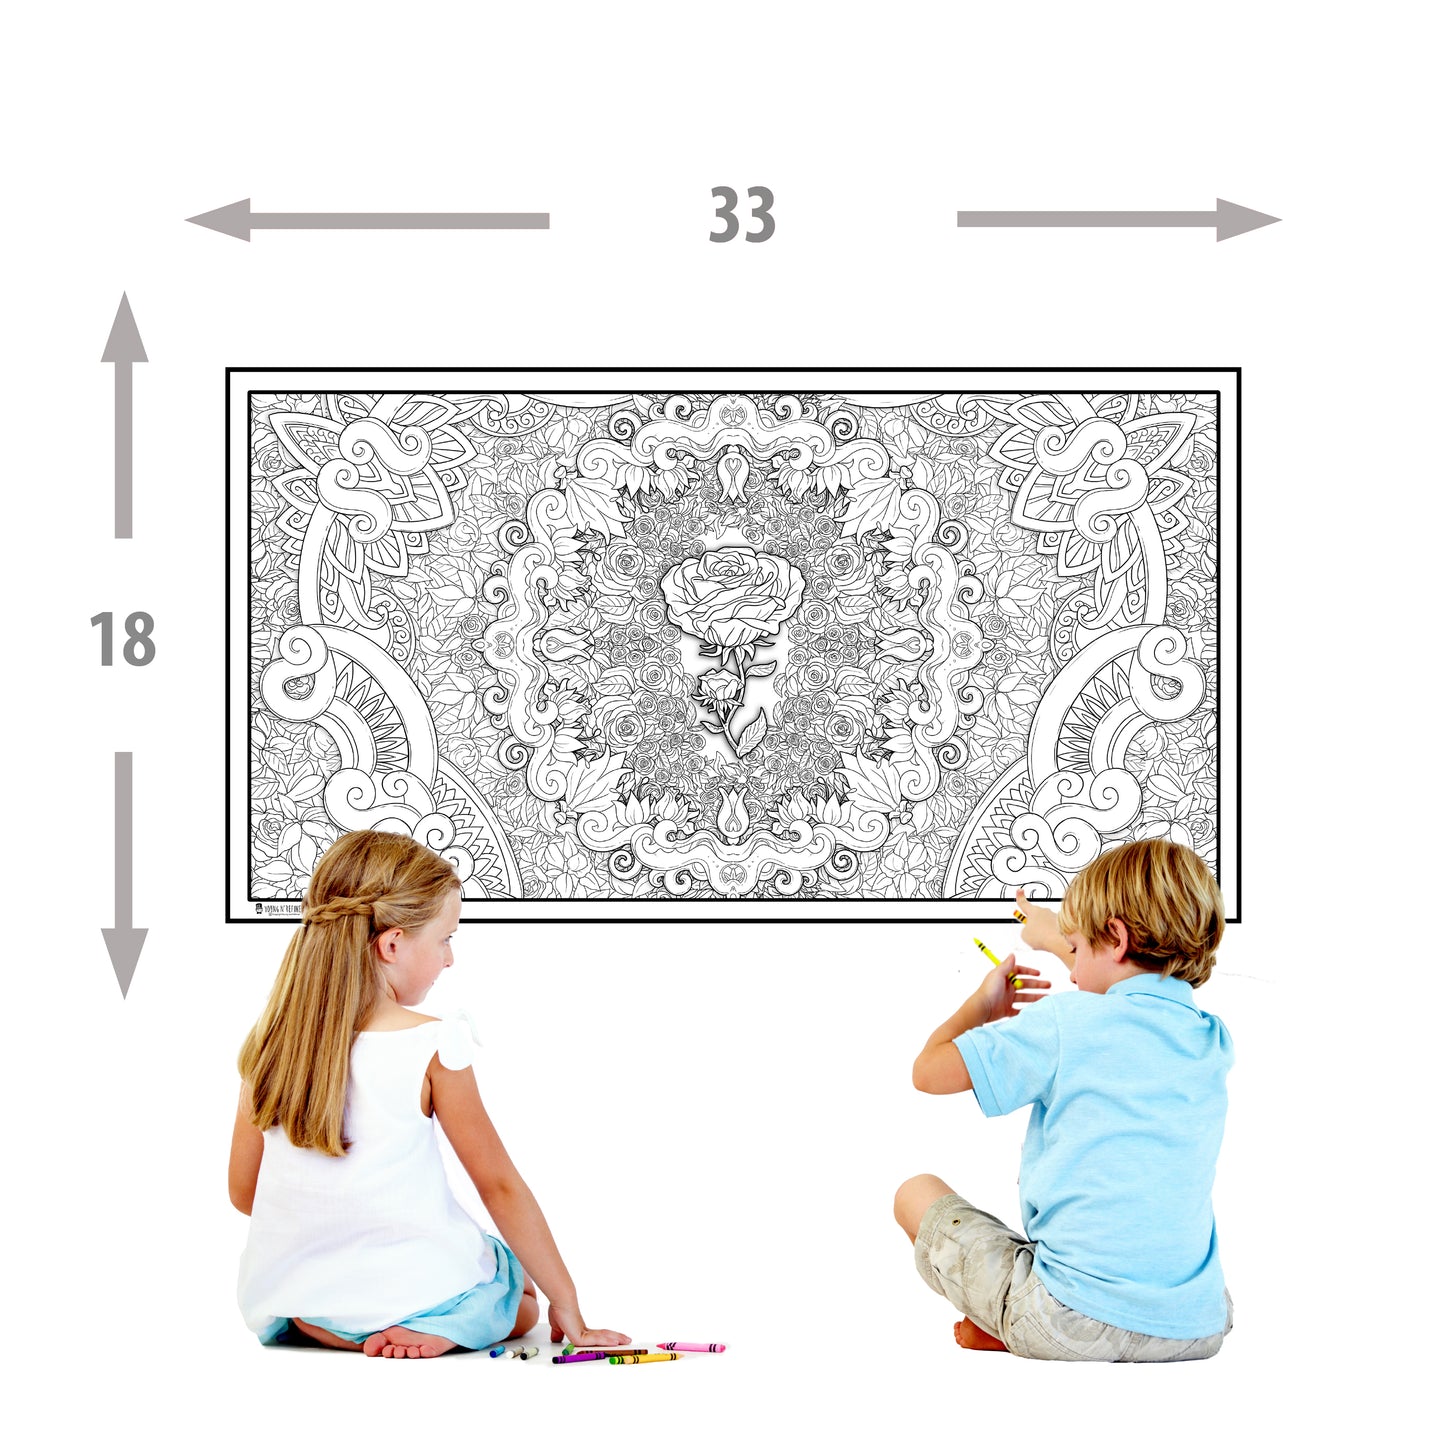 2 Pack of Giant Coloring Posters of Center Rose Among Flower Mandalas Folded Version Young N Refined